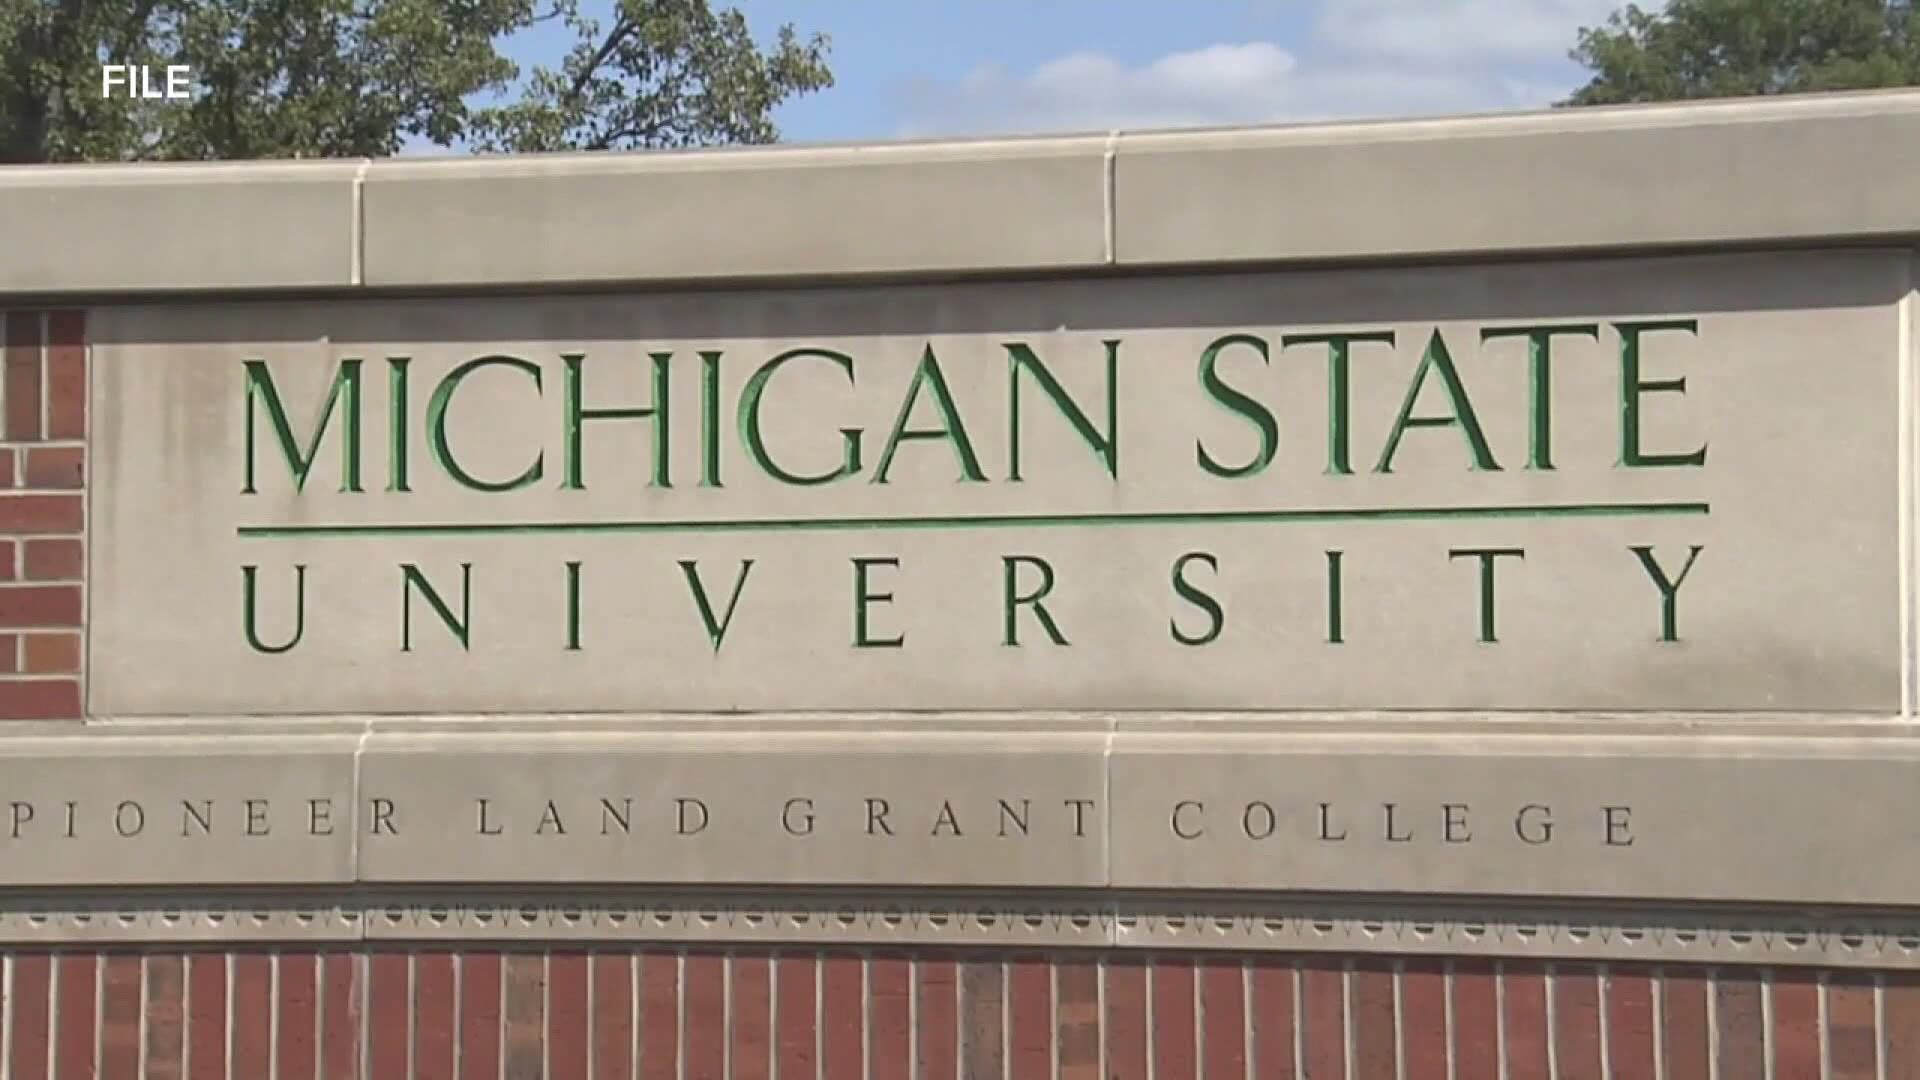 "This was an extraordinarily difficult decision, but the safety of our campus community must be our paramount concern," the MSU president said.